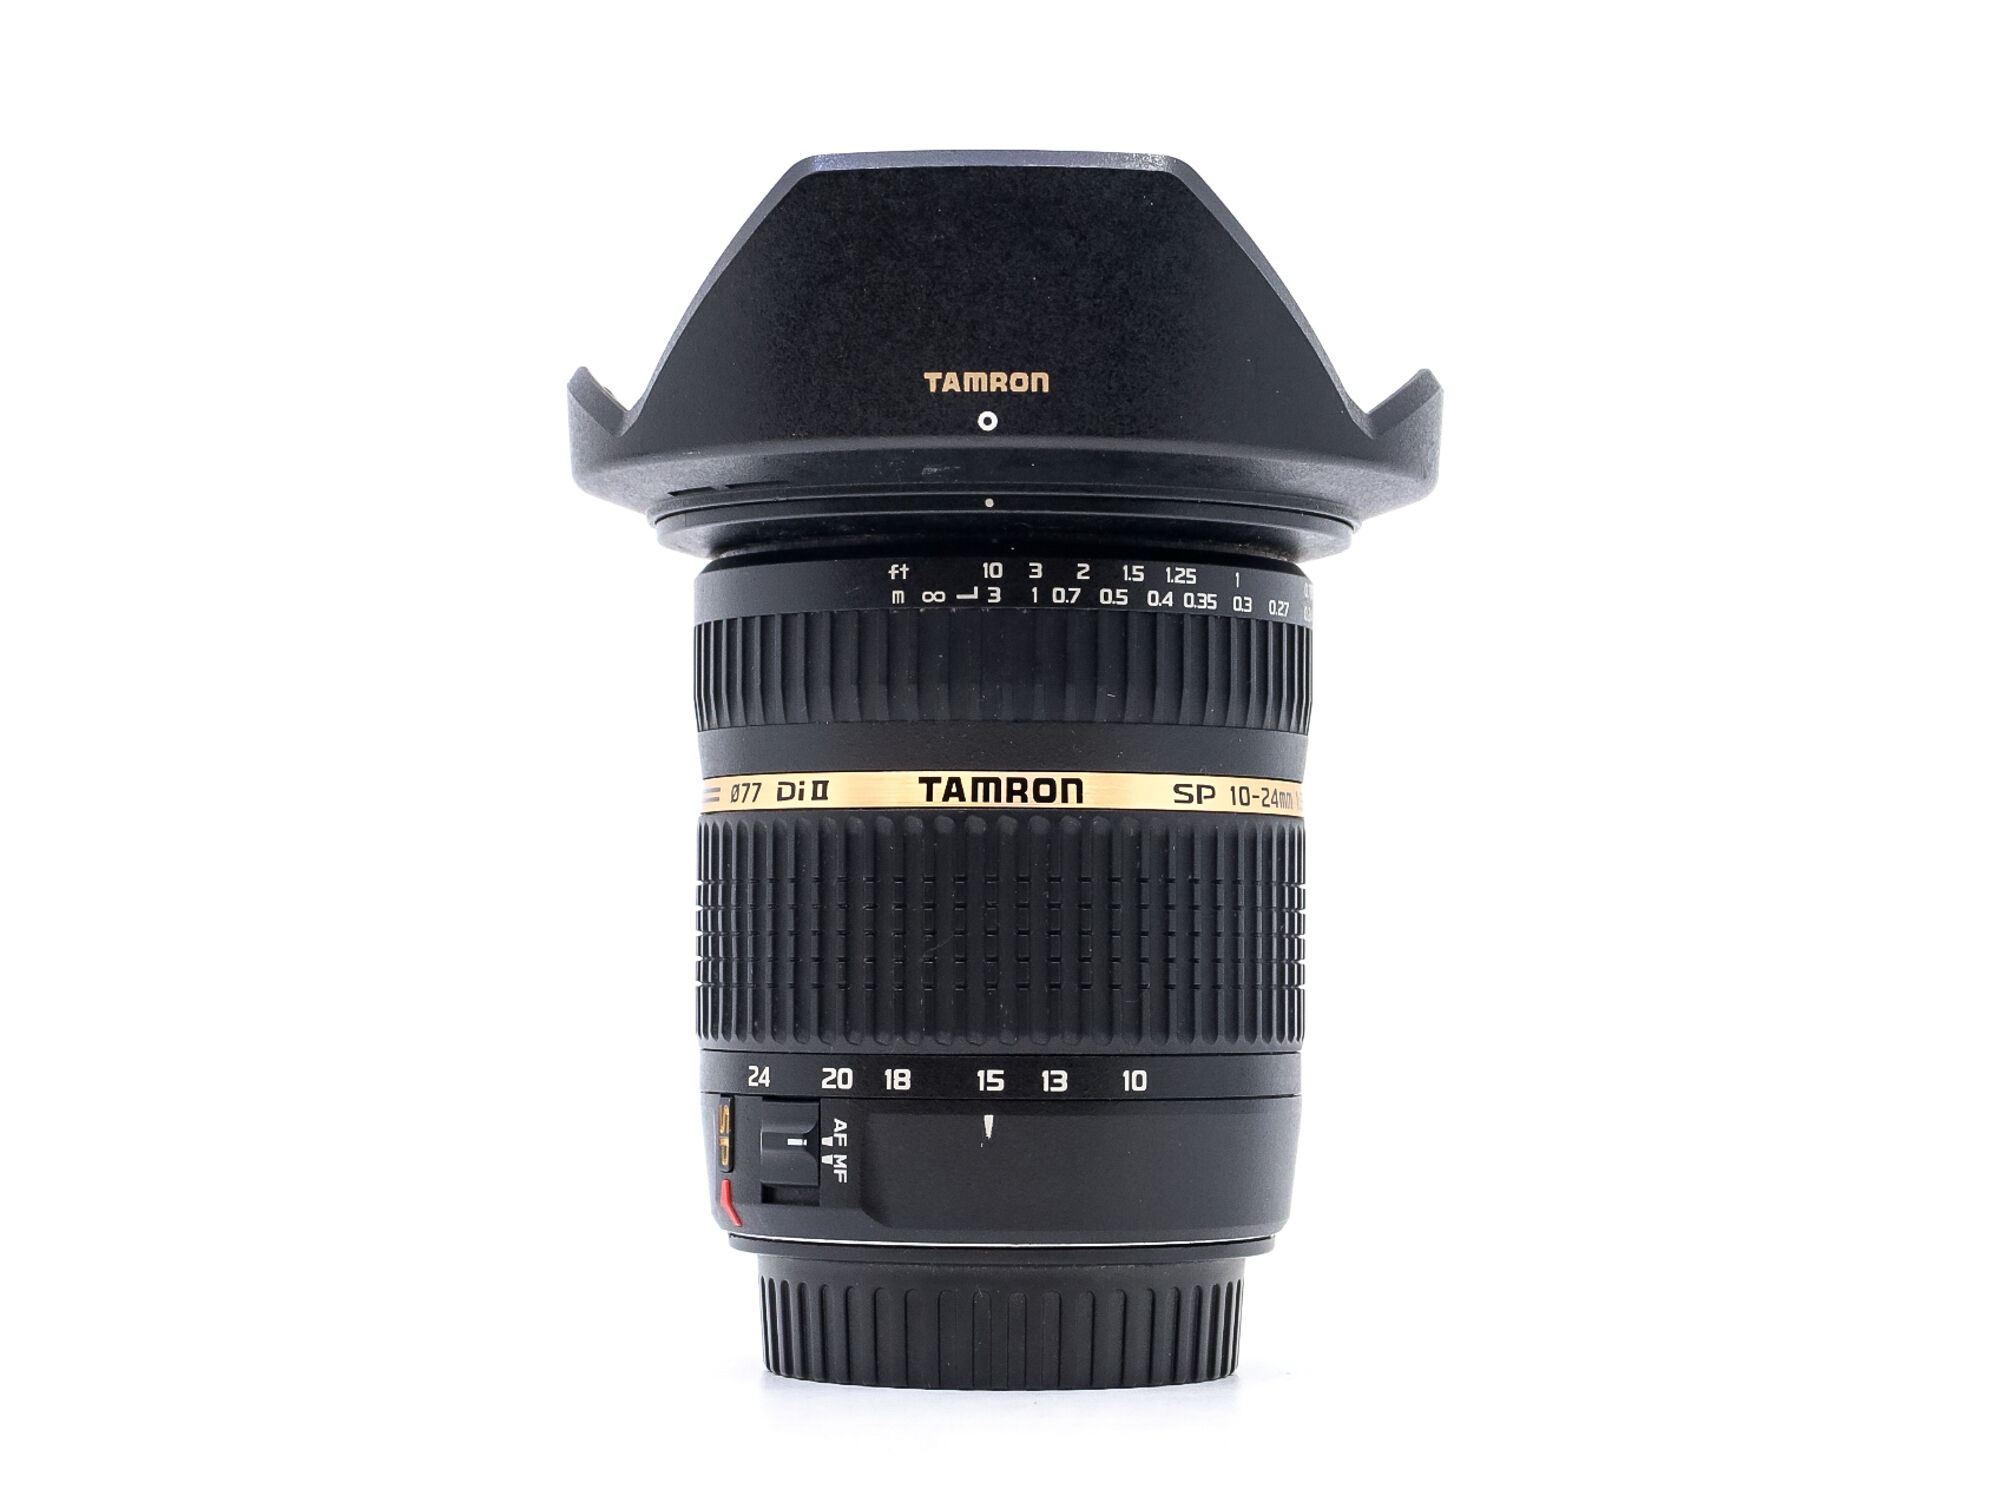 Tamron SP AF 10-24mm f/3.5-4.5 Di II LD Aspherical (IF) Canon EF-S Fit (Condition: Excellent)